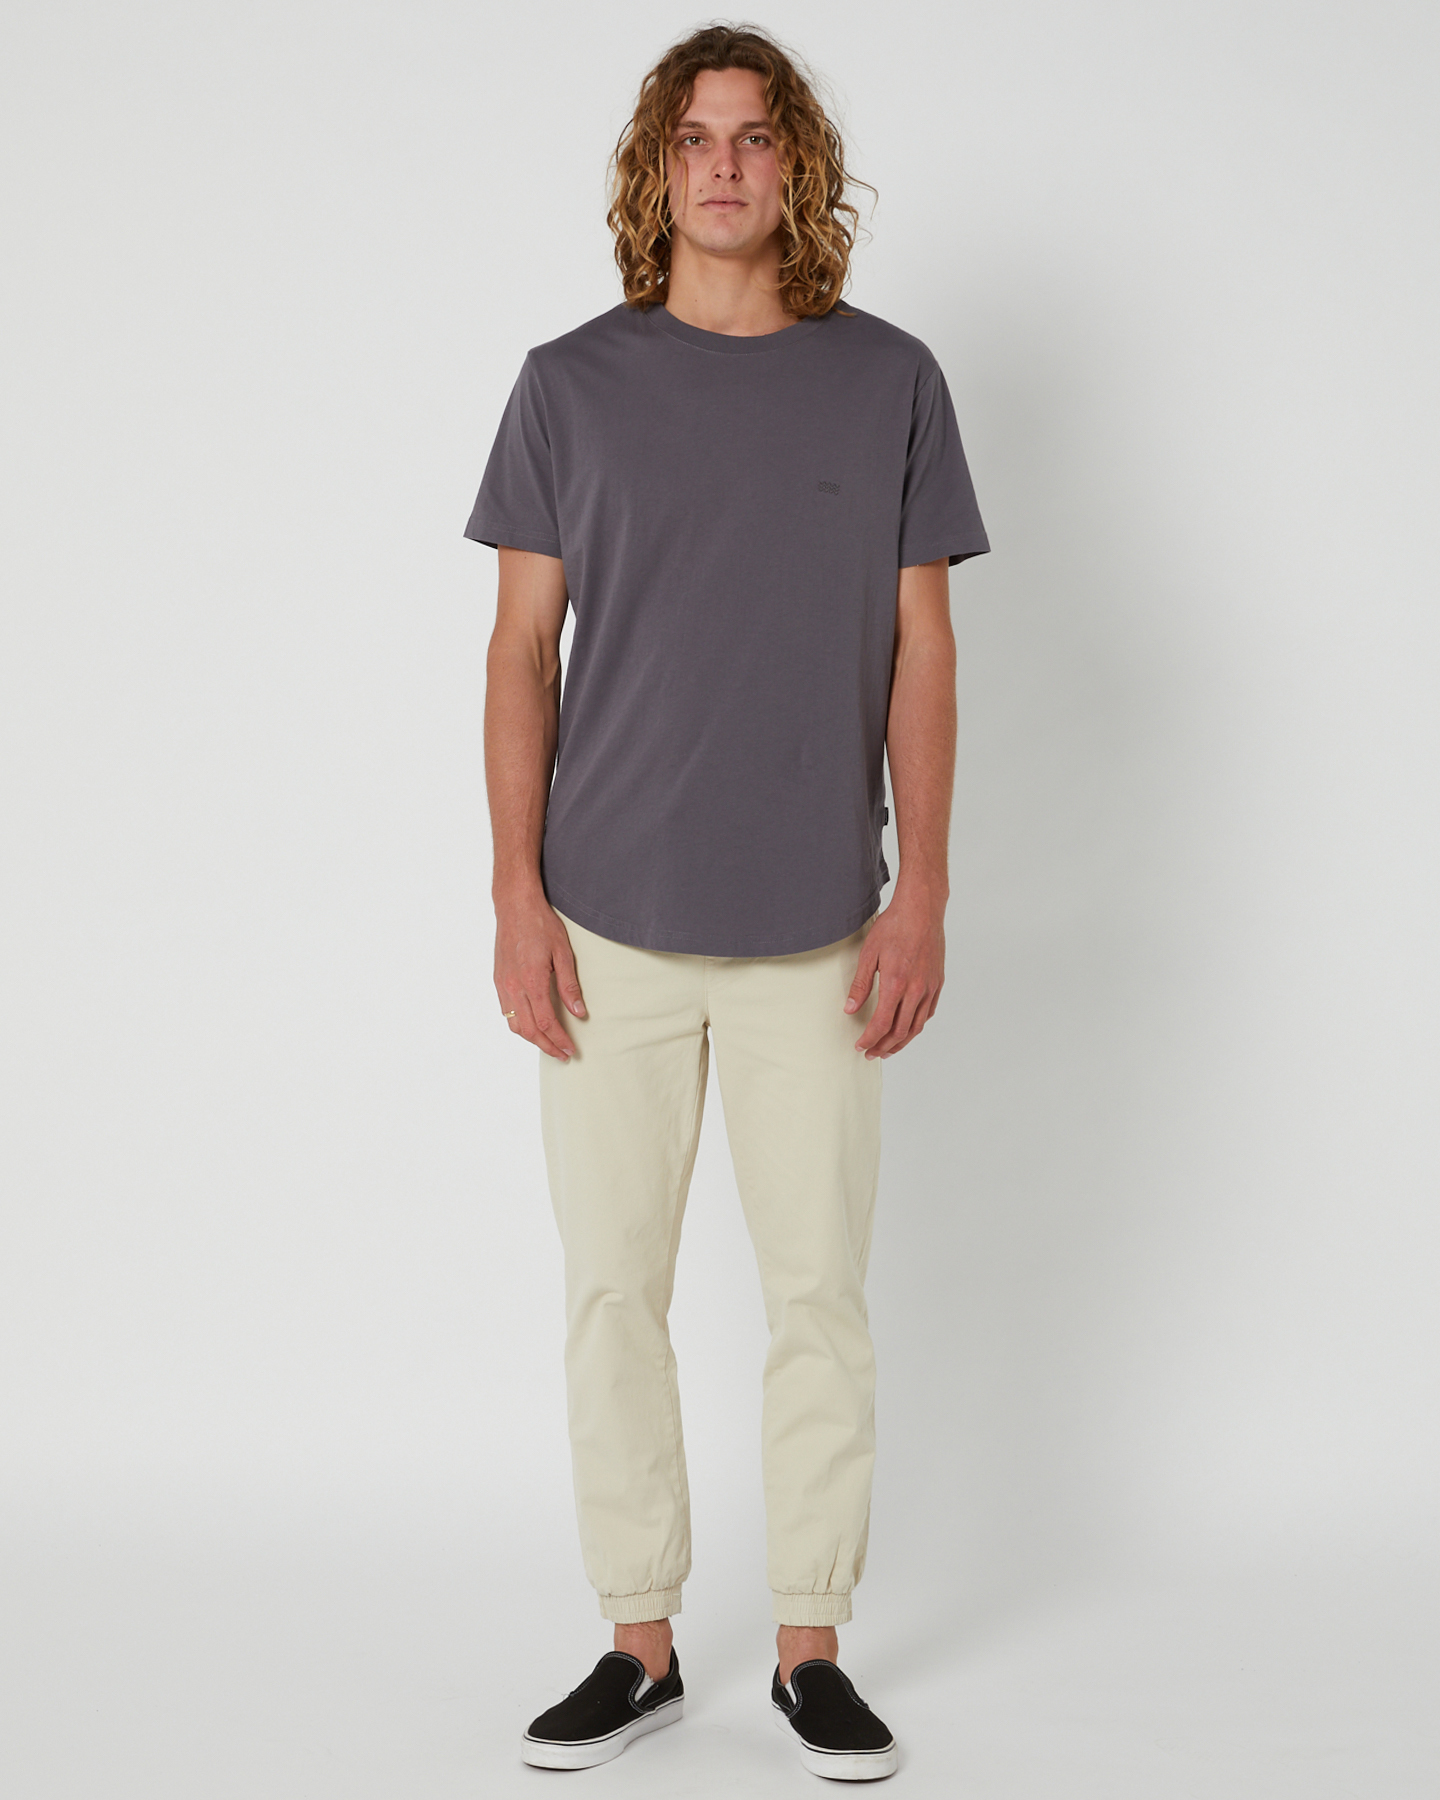 Swell Woven Jogger Pant Sand - Tan | SurfStitch